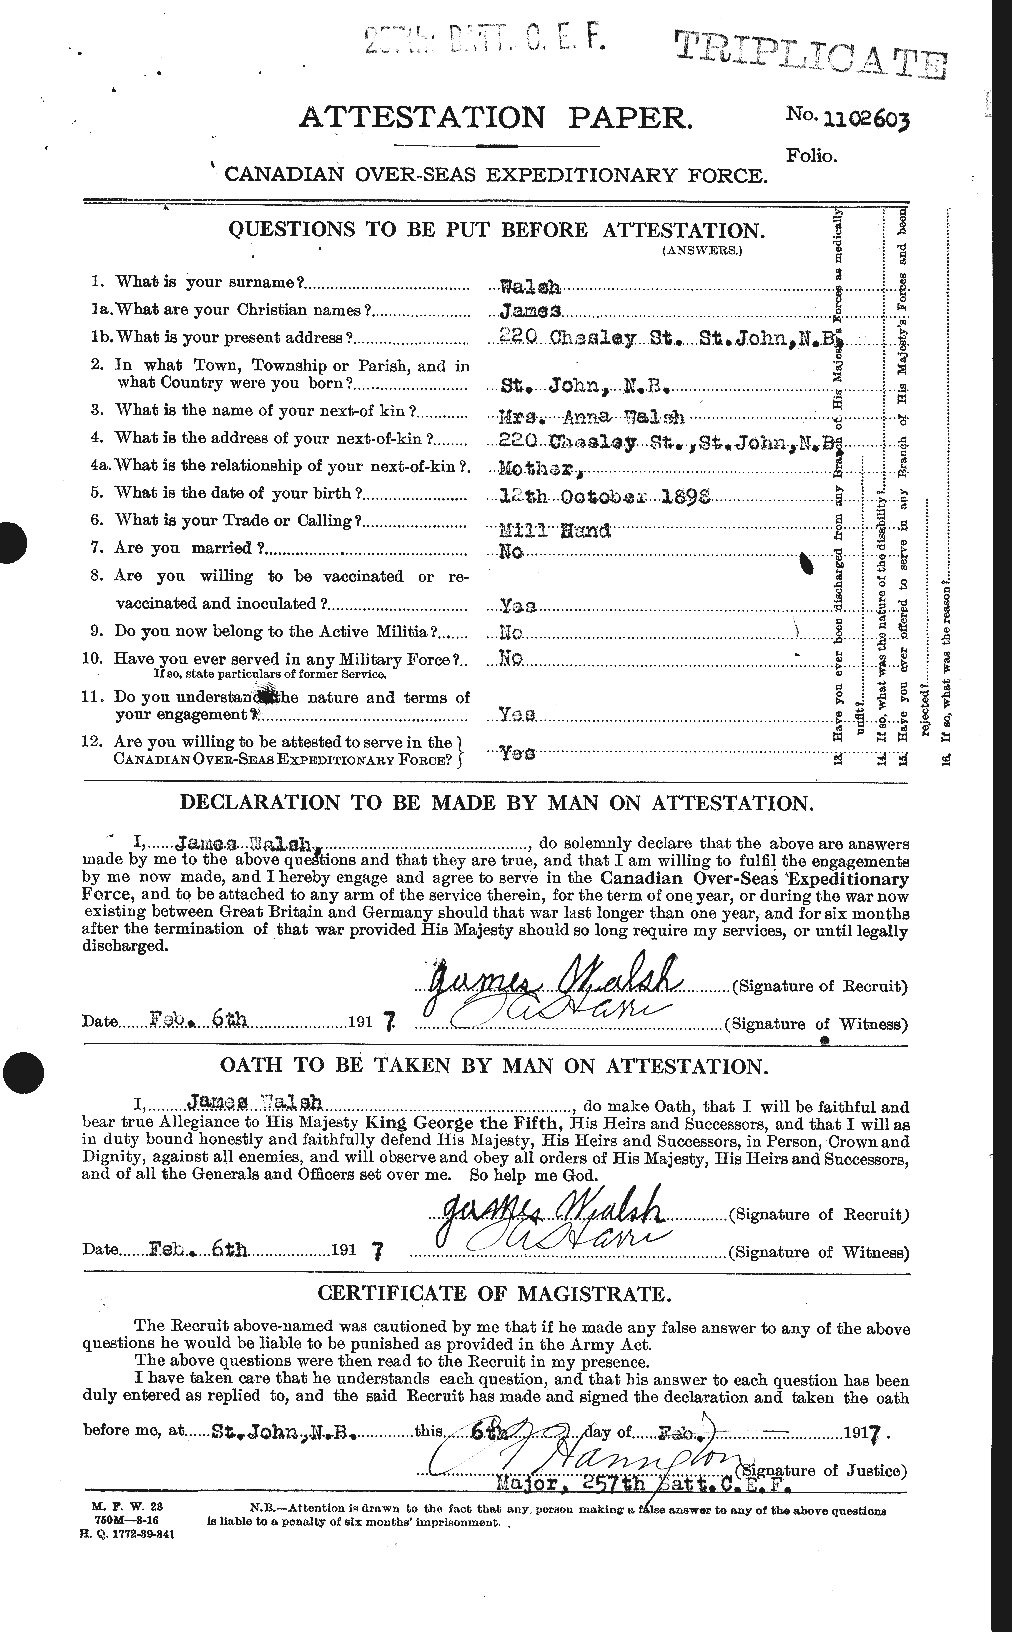 Personnel Records of the First World War - CEF 653281a